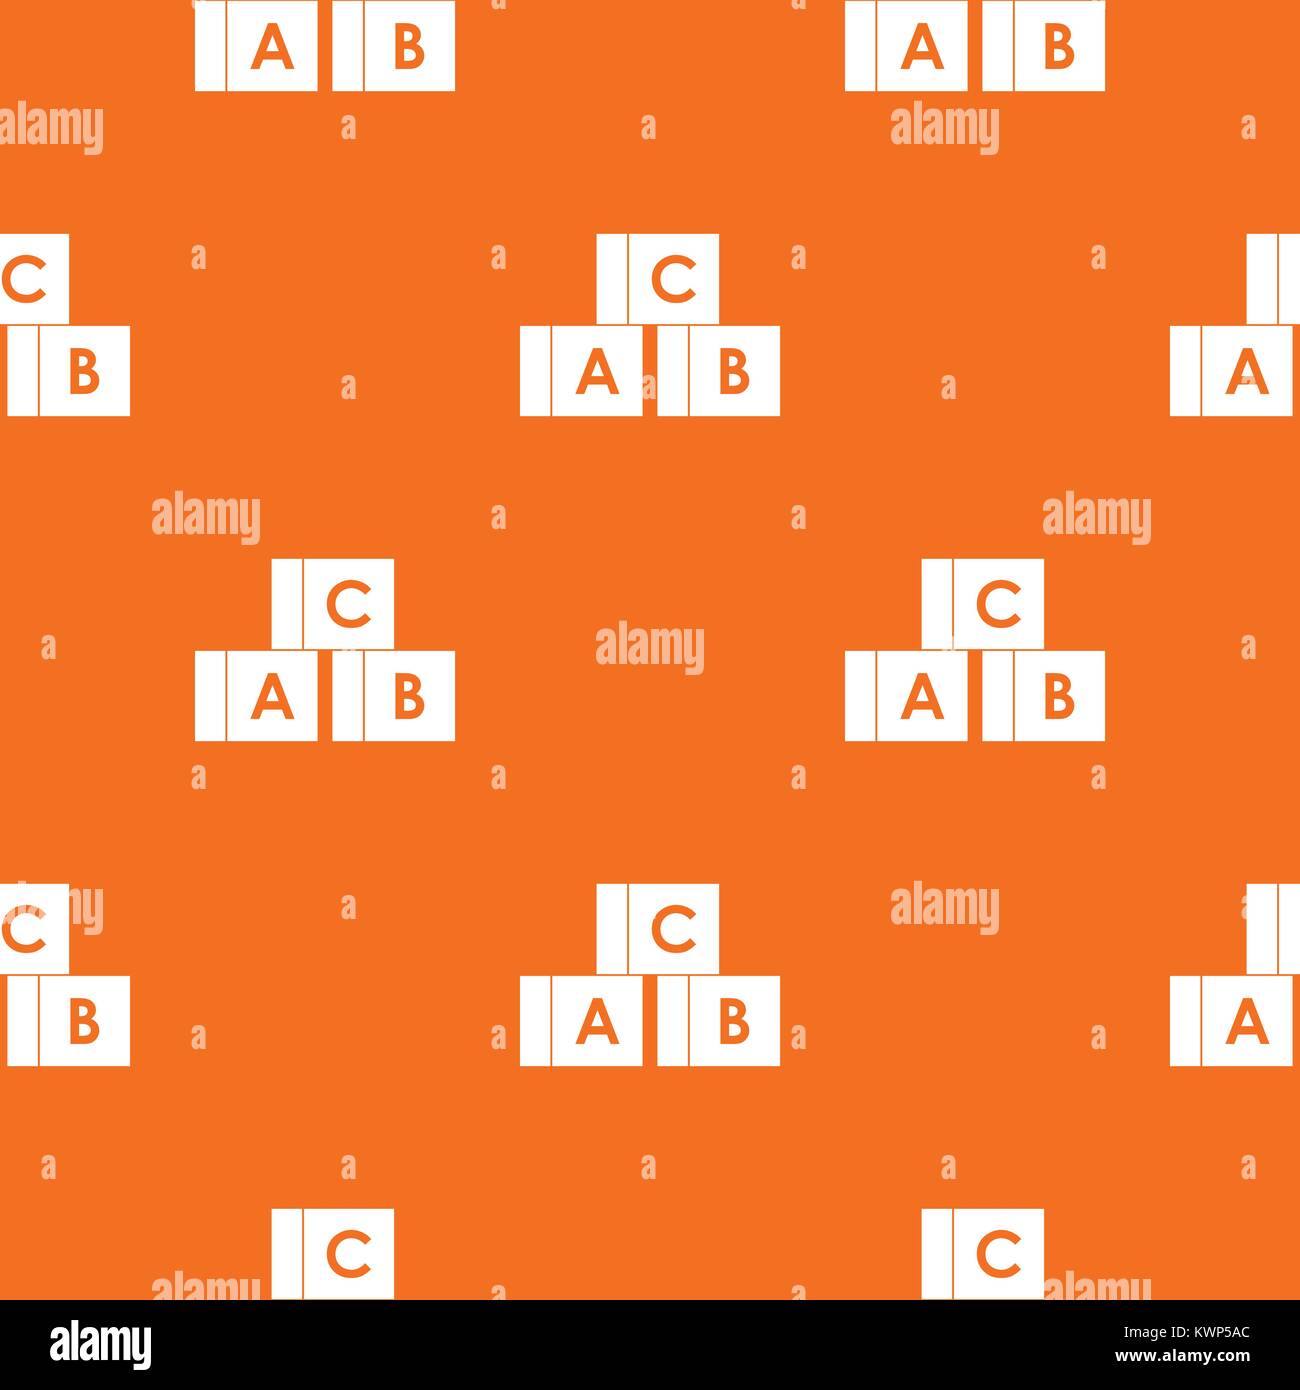 alphabet-cubes-with-letters-a-b-c-pattern-seamless-stock-vector-image